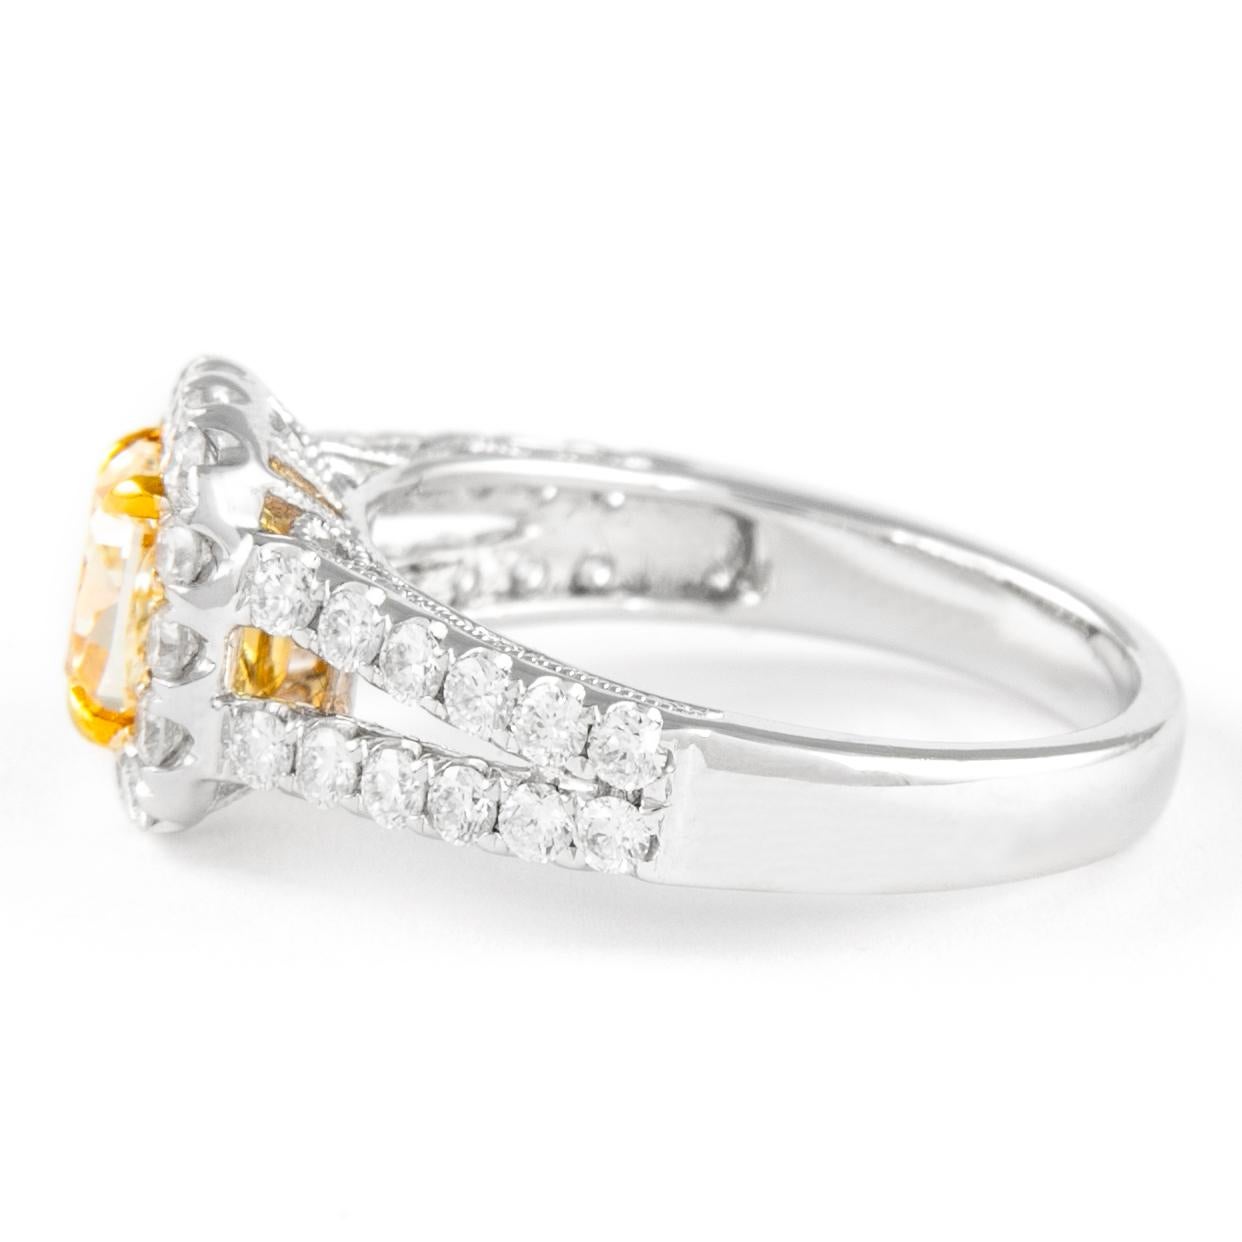 Cushion Cut Alexander 1.79ctt Fancy Yellow Cushion VS1 Diamond with Halo Ring 18k Two Tone For Sale